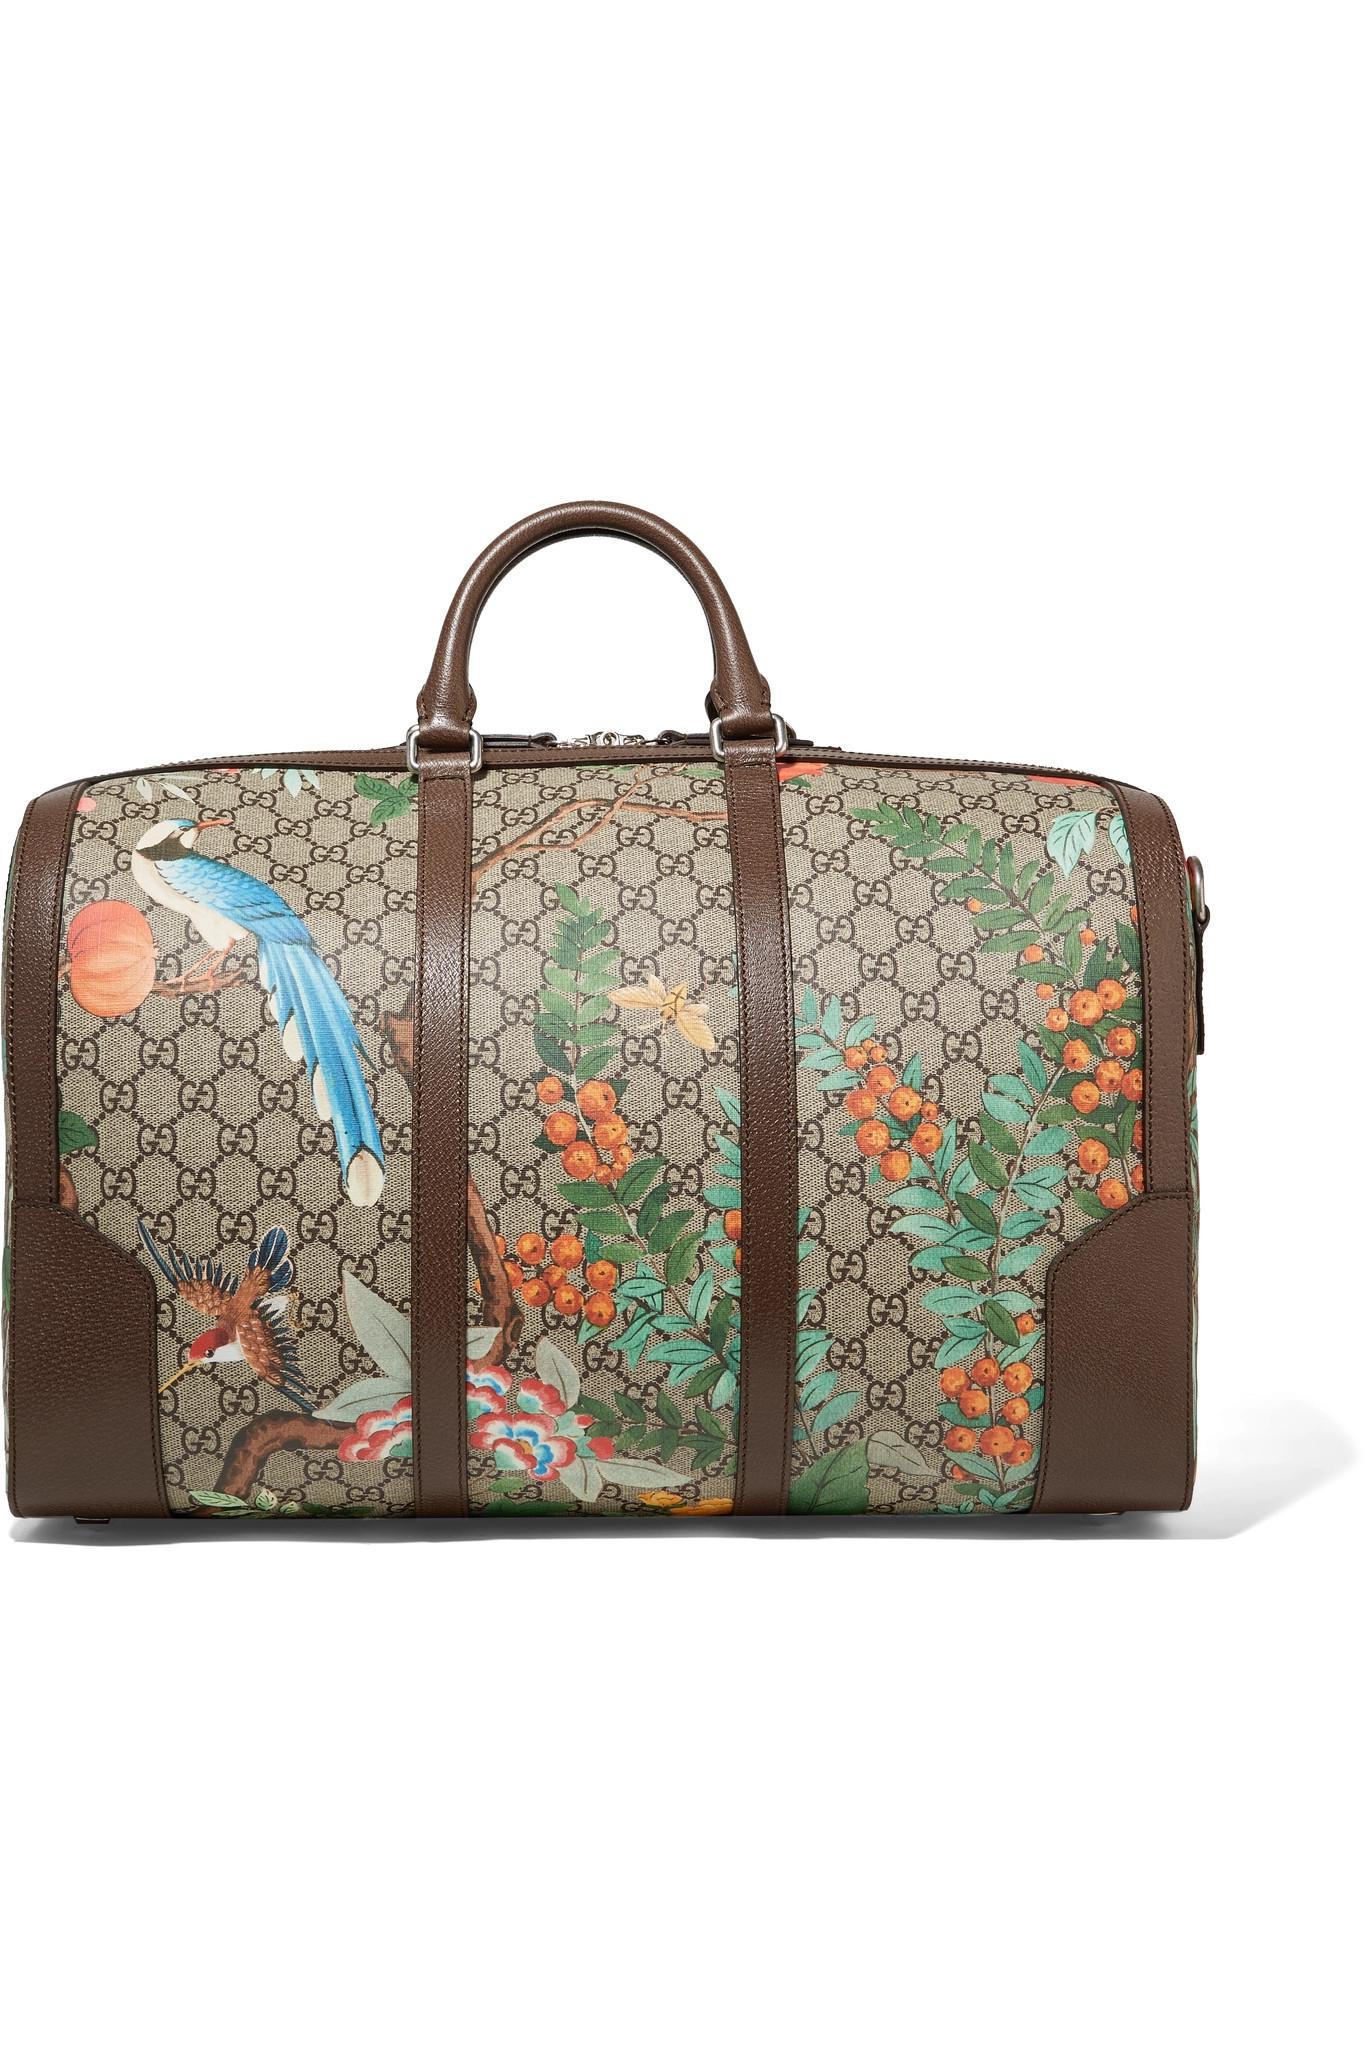 Gucci Leather-trimmed Printed Coated-canvas Weekend Bag in Natural - Lyst